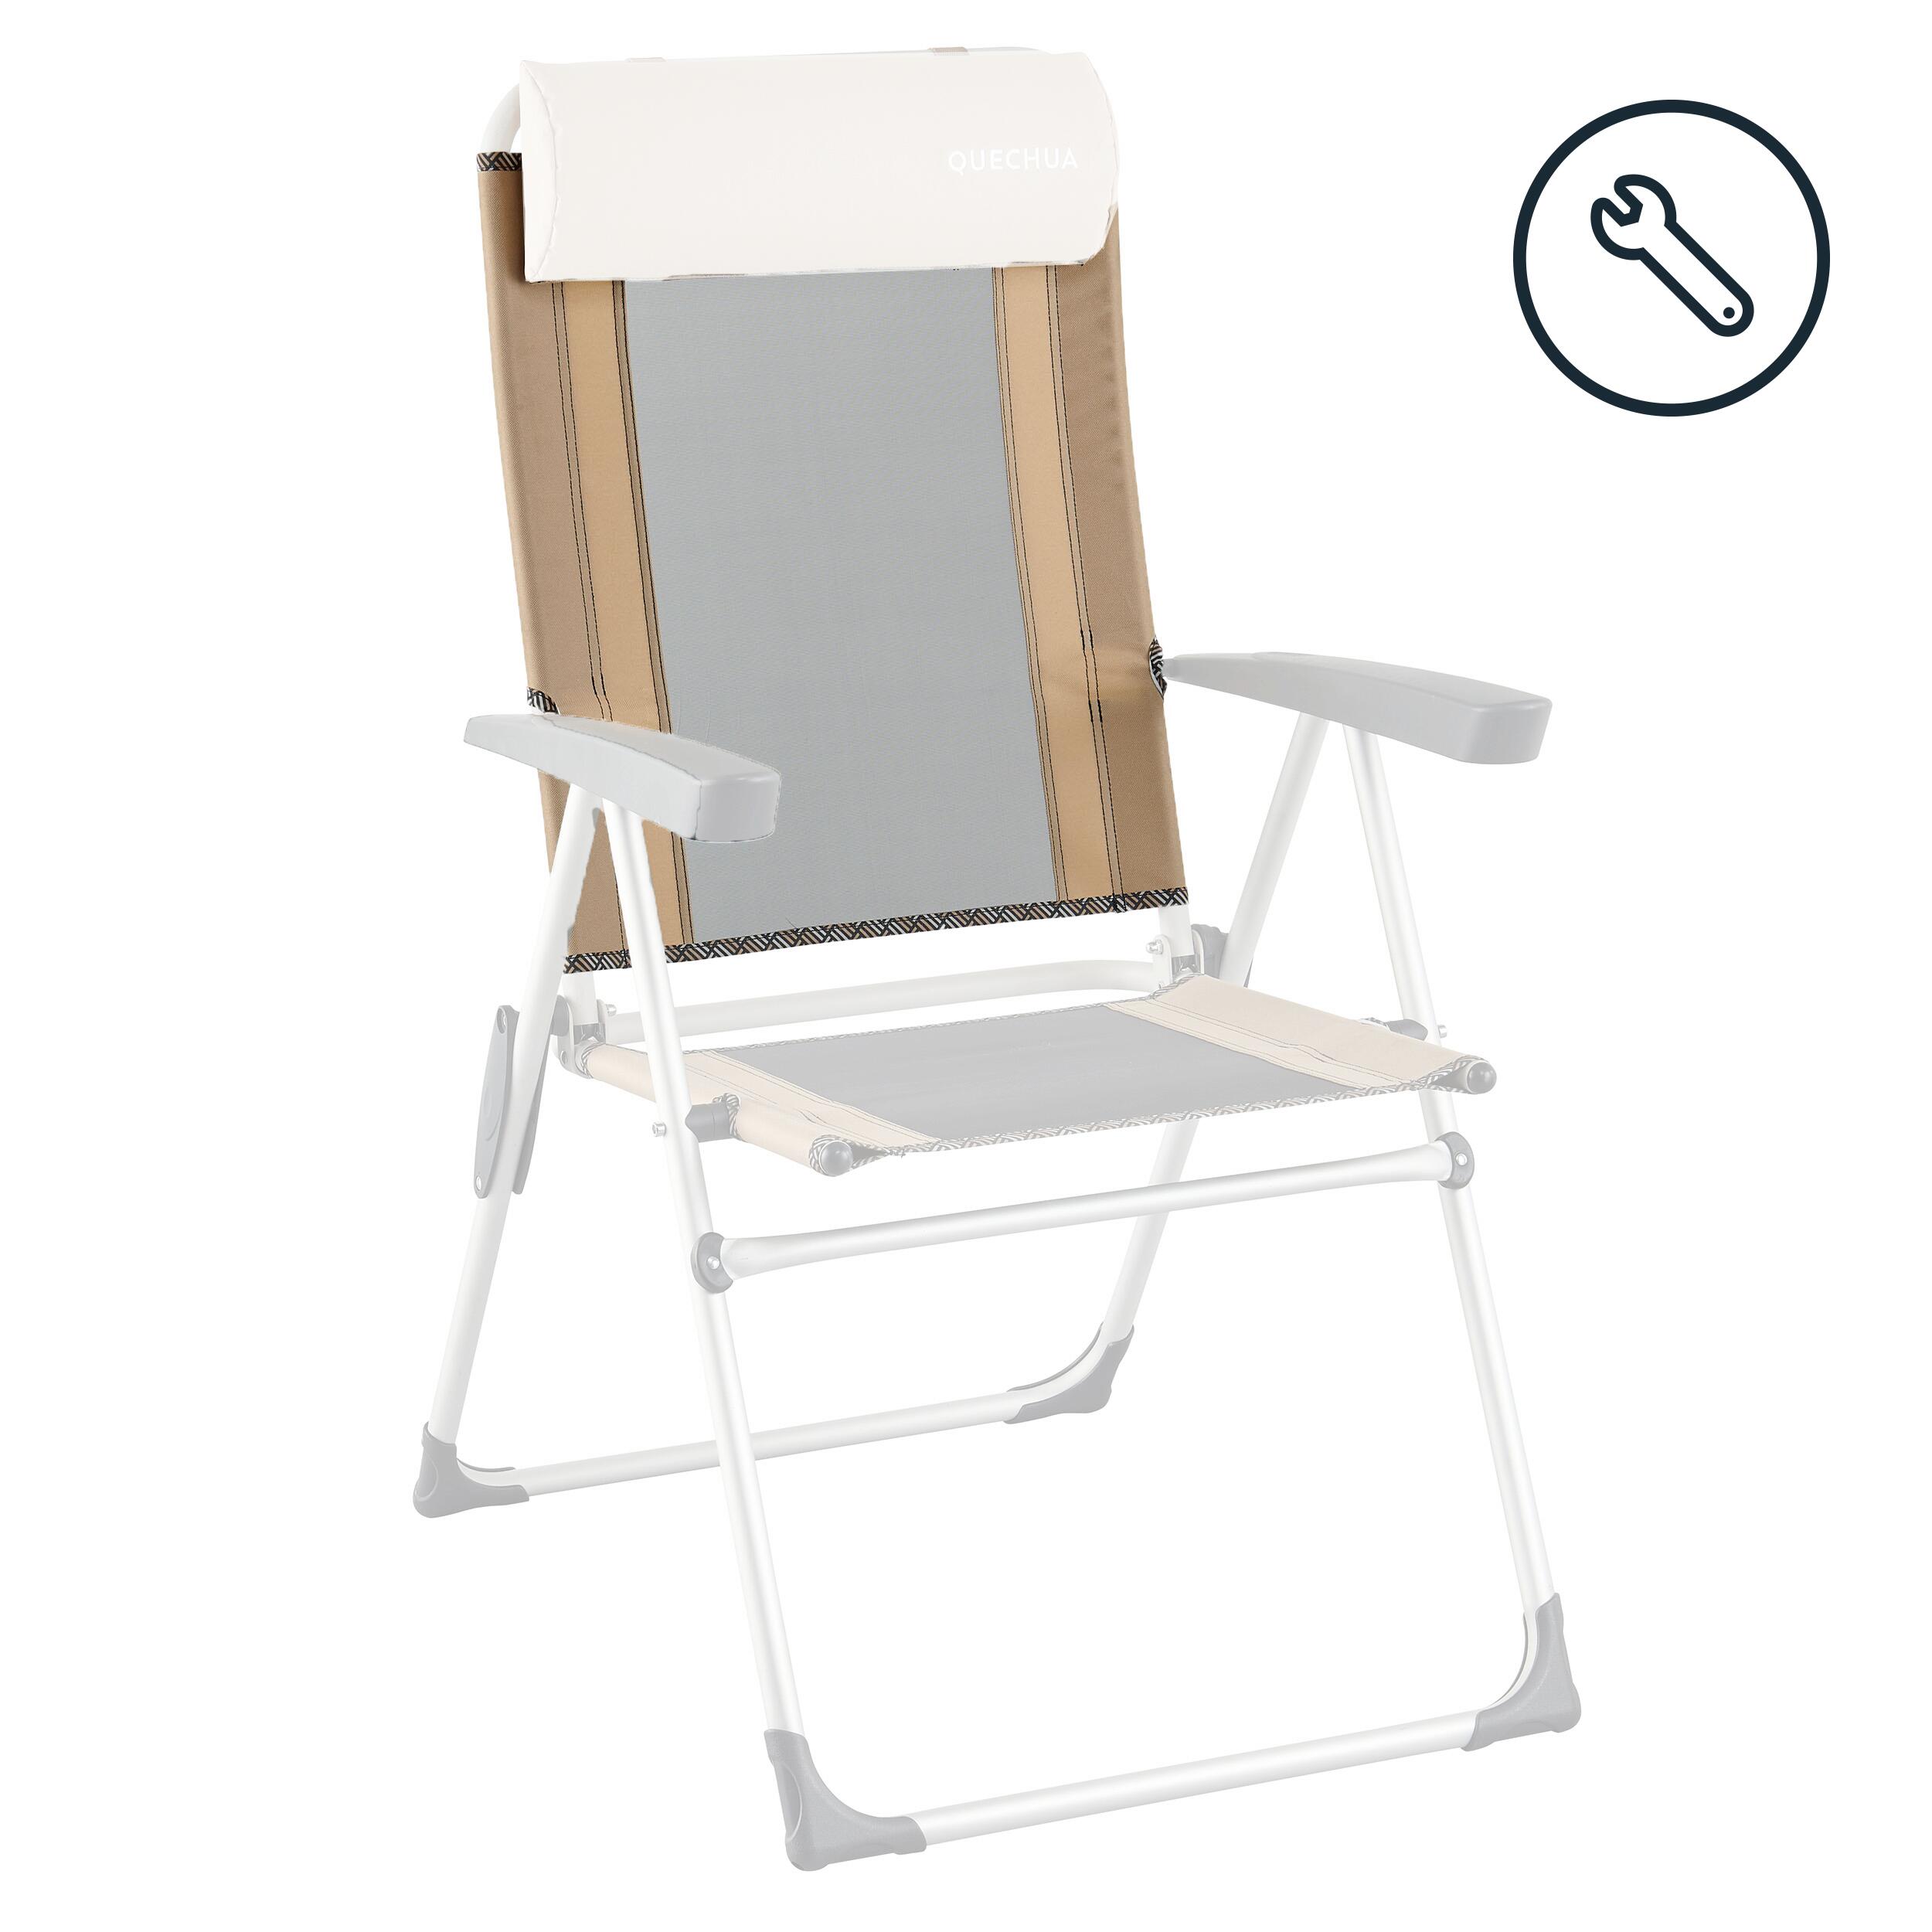 QUECHUA CHAIR BACK - SPARE PART FOR COMFORT RECLINER